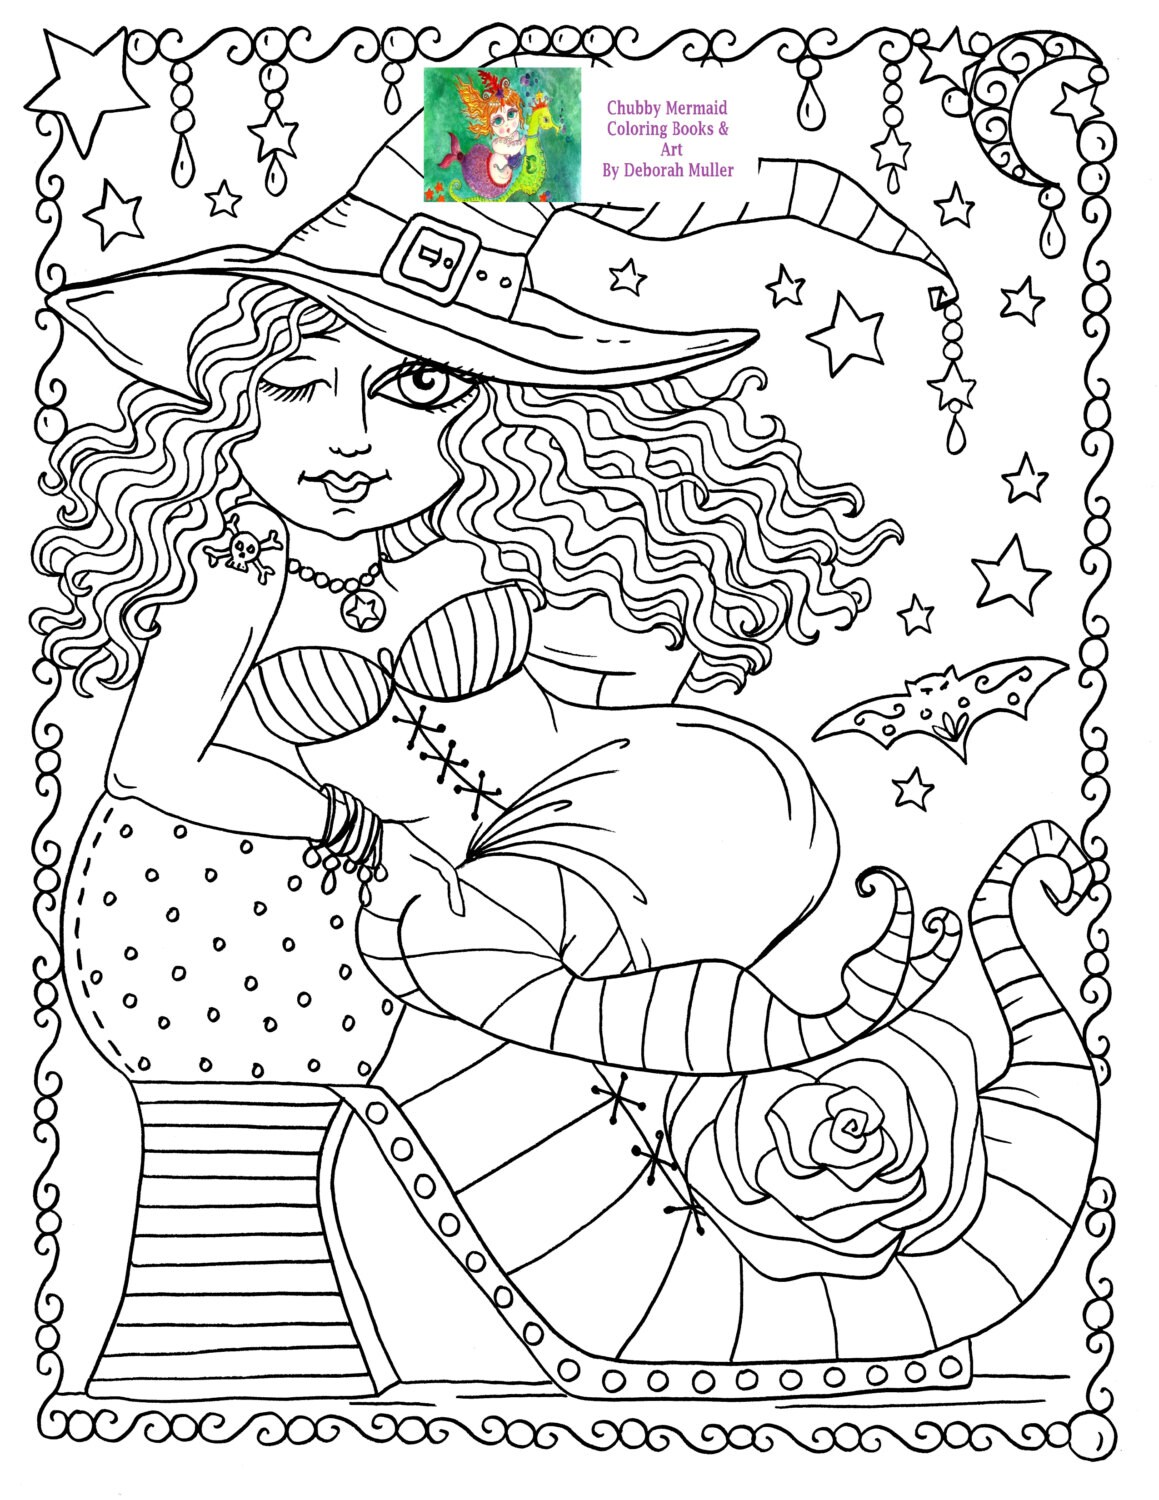 Instant download sexy shoe witch chubby cute halloween fun coloring pagedigitaldigistampfalladult coloring